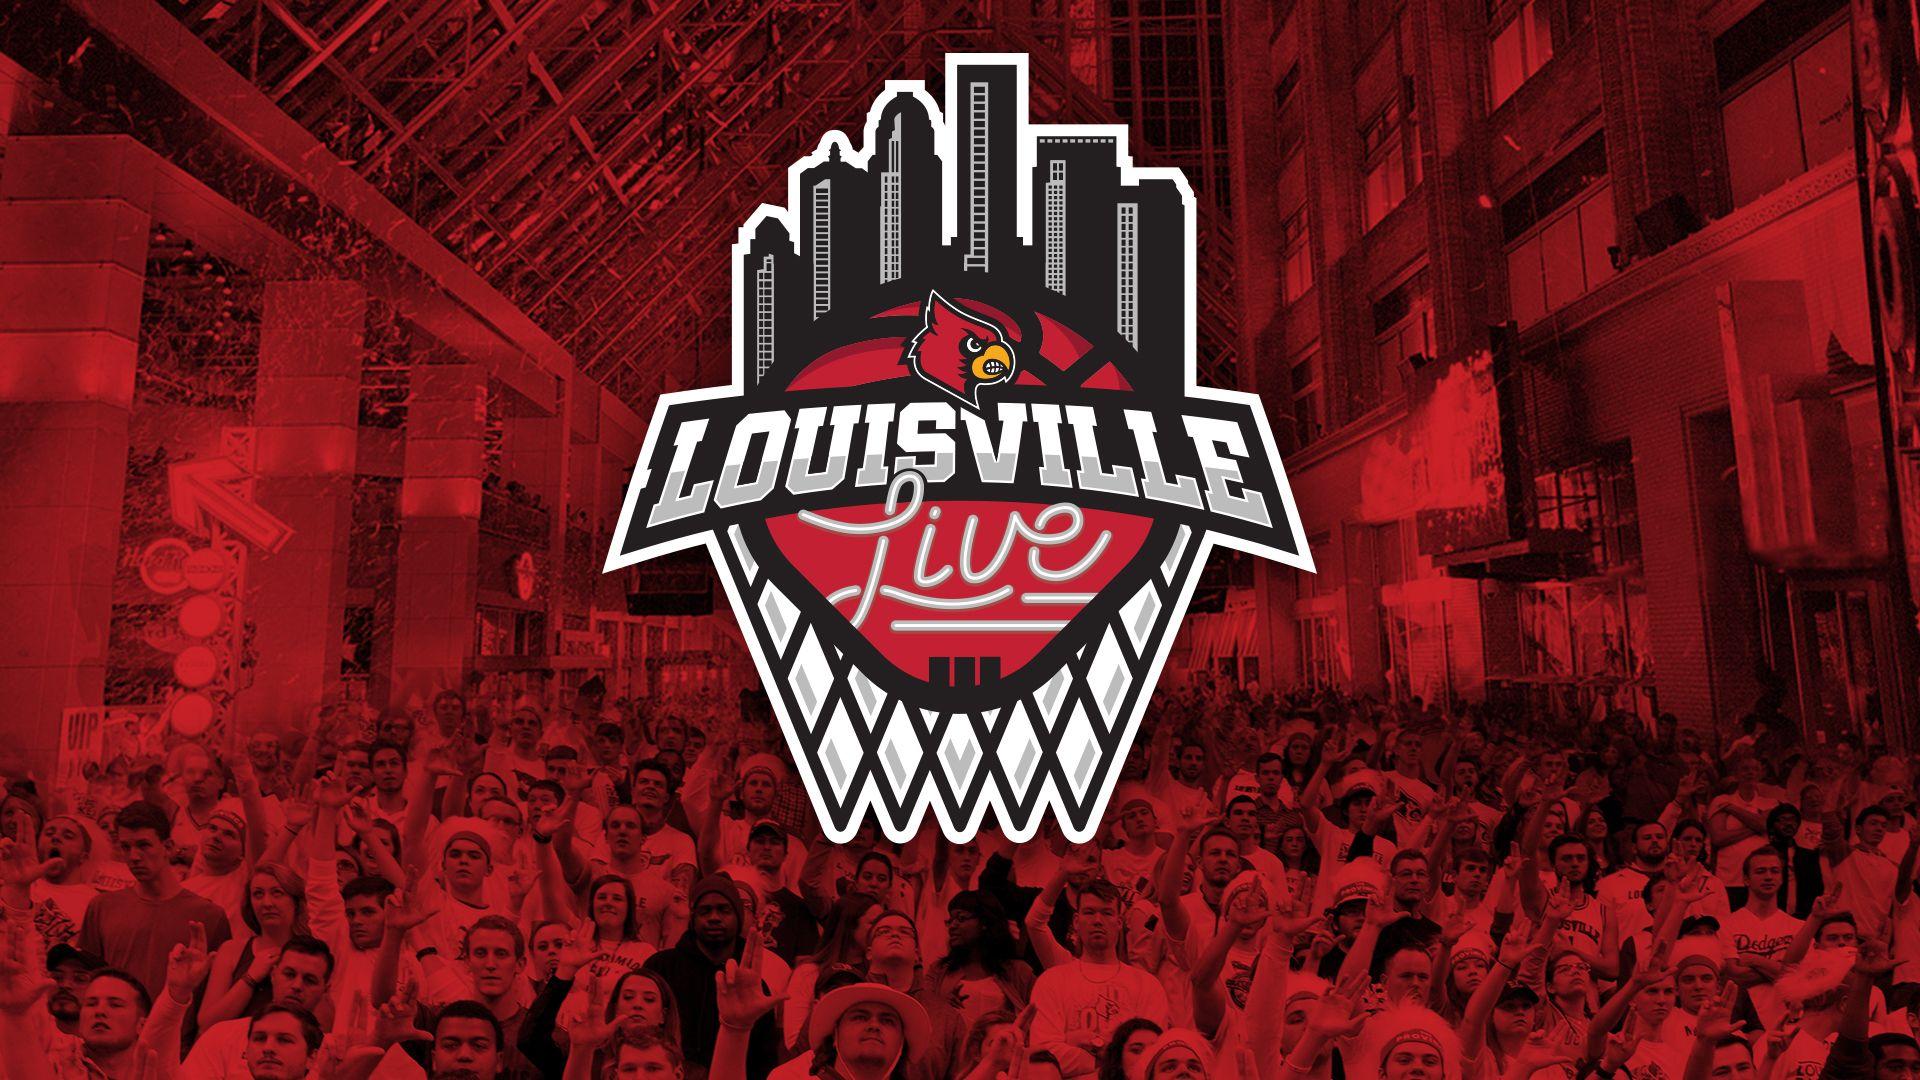 U of L Basketball Logo - UofL Basketball Opens With Louisville Live Sept. 28